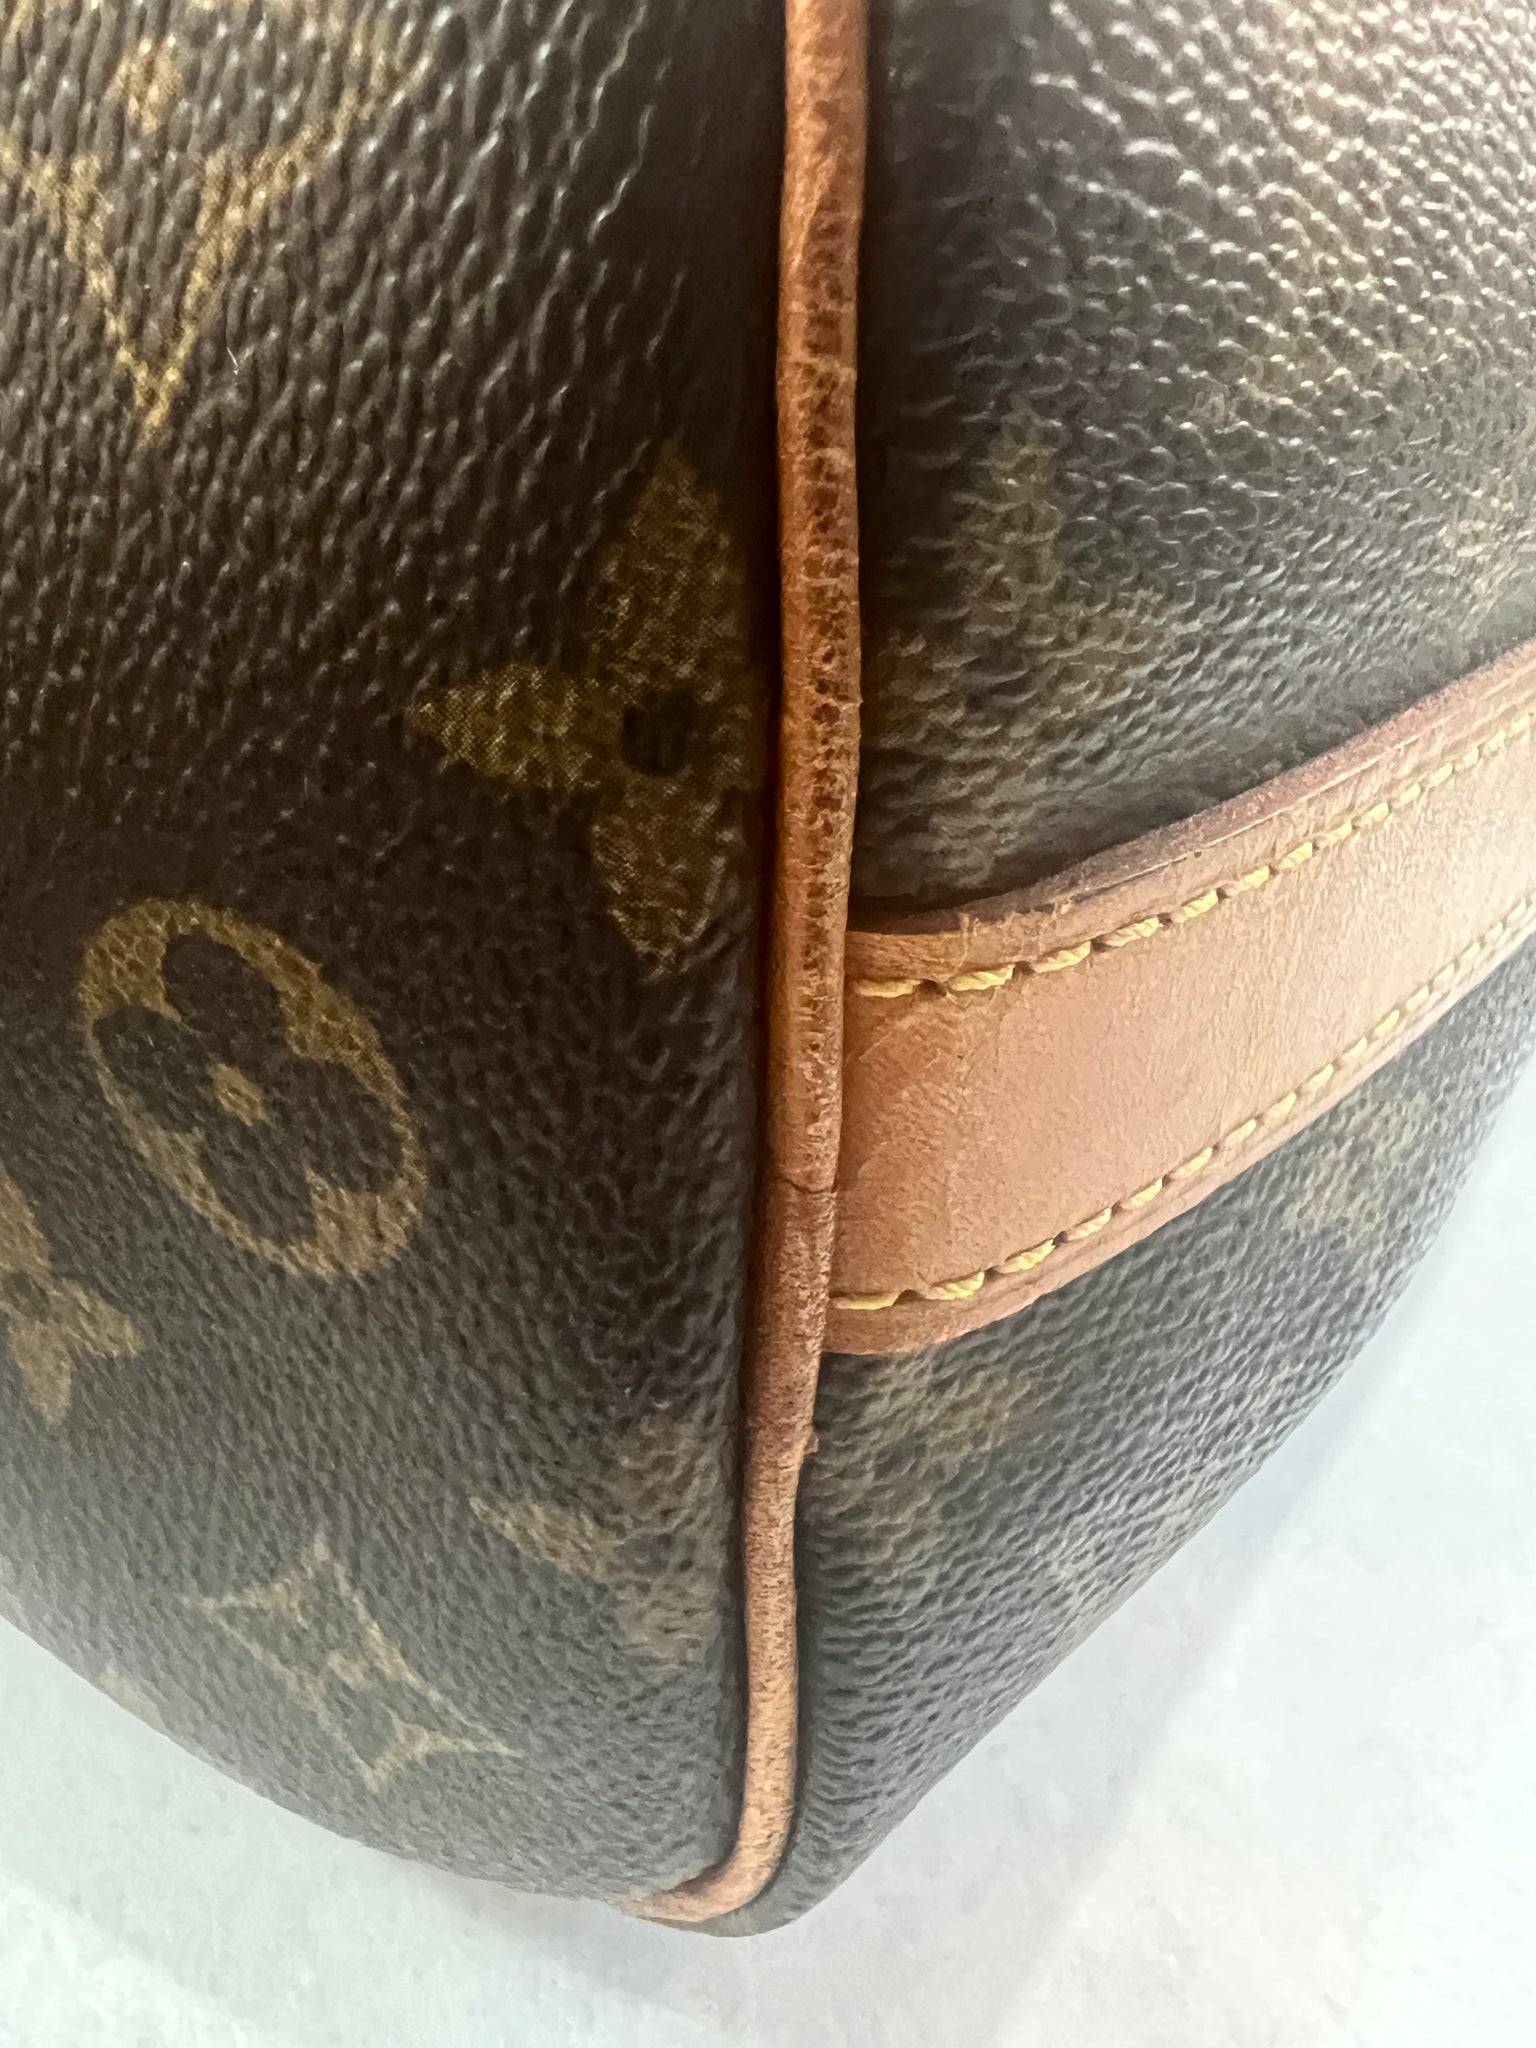 Louis Vuitton Vintage Brown Monogram Sac Flanerie 45 Tote, Best Price and  Reviews